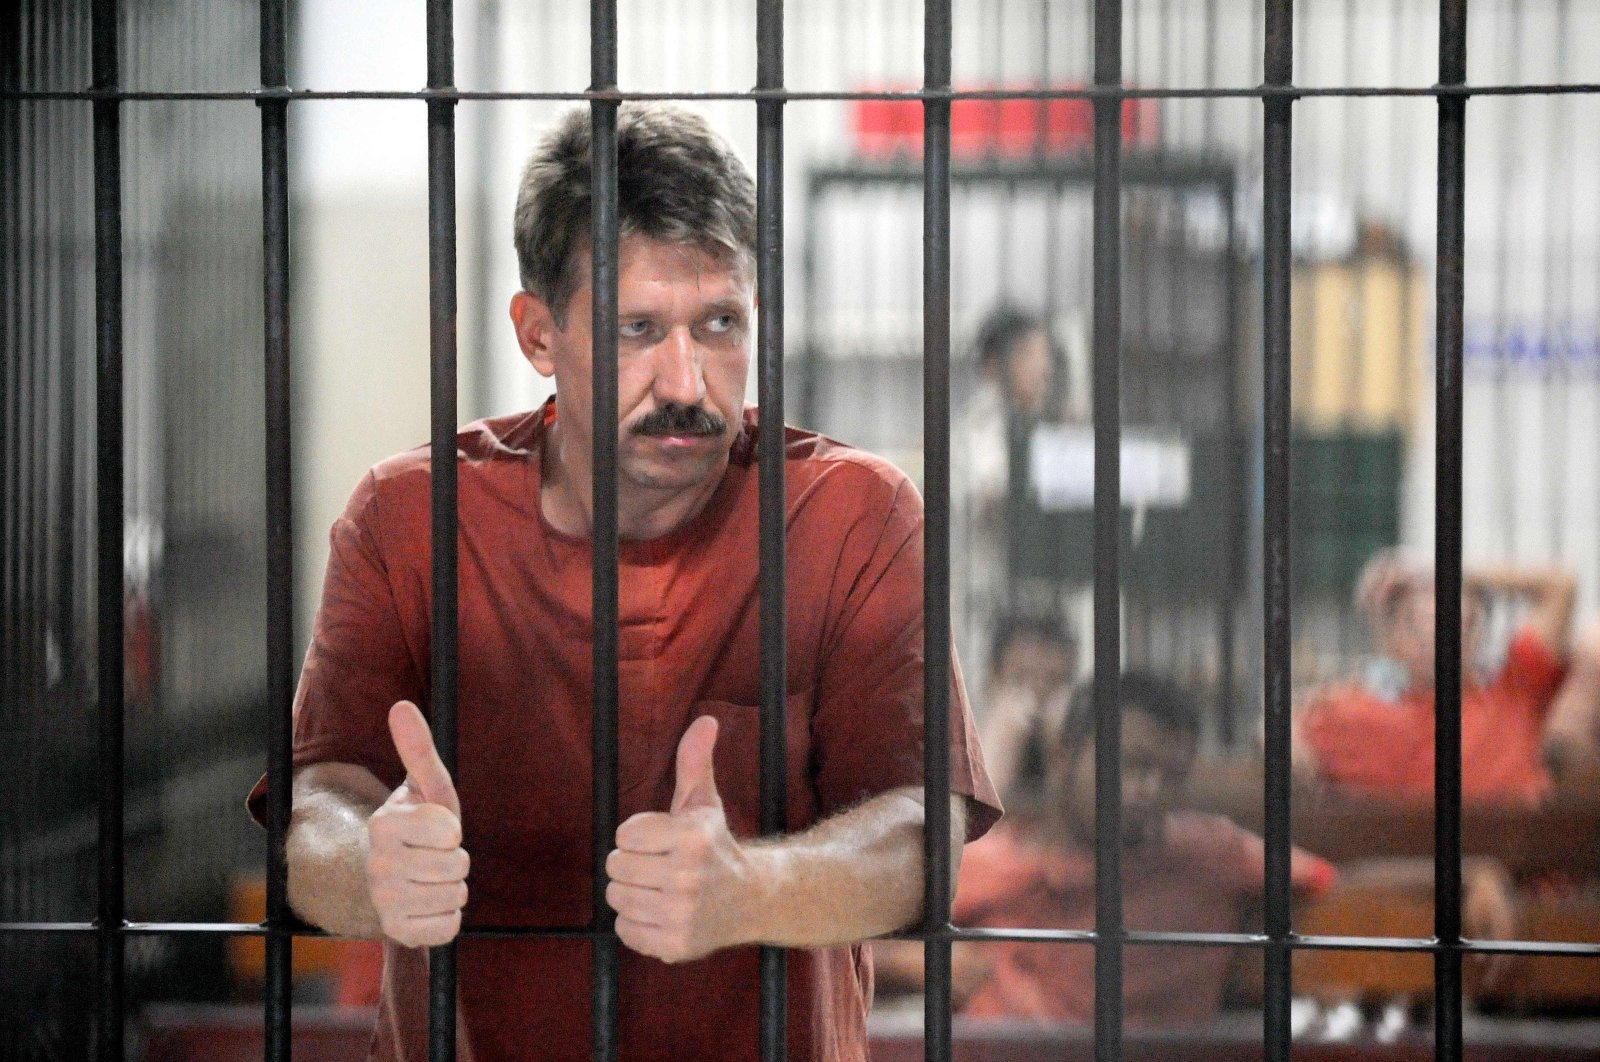 Russian arms dealer Viktor Bout stands behind bars ahead of a court hearing at the Criminal Court in Bangkok, Thailand, March 6, 2009. (AFP Photo)